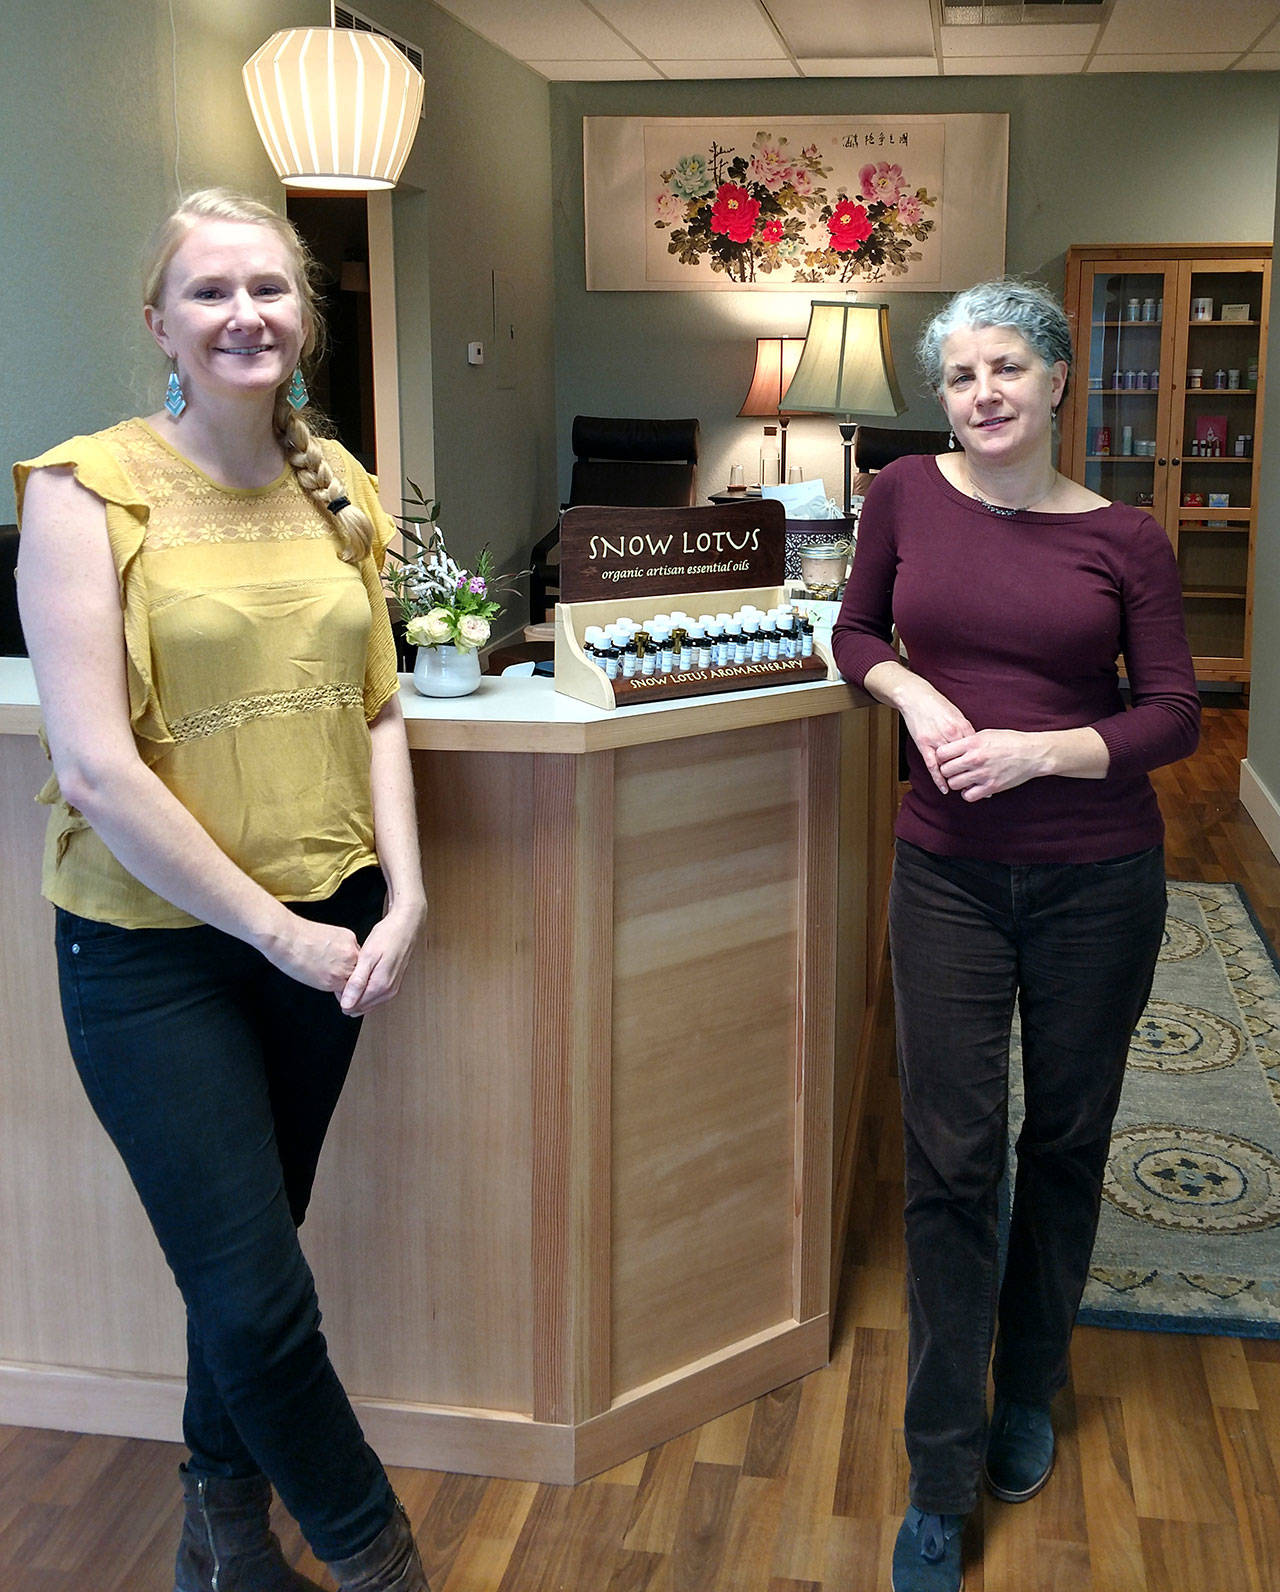 Massage therapist Melissa Moen, left, and Acupuncturist Karin Nelson are the providers at Becalm. (Susan Riemer/Staff Photo)